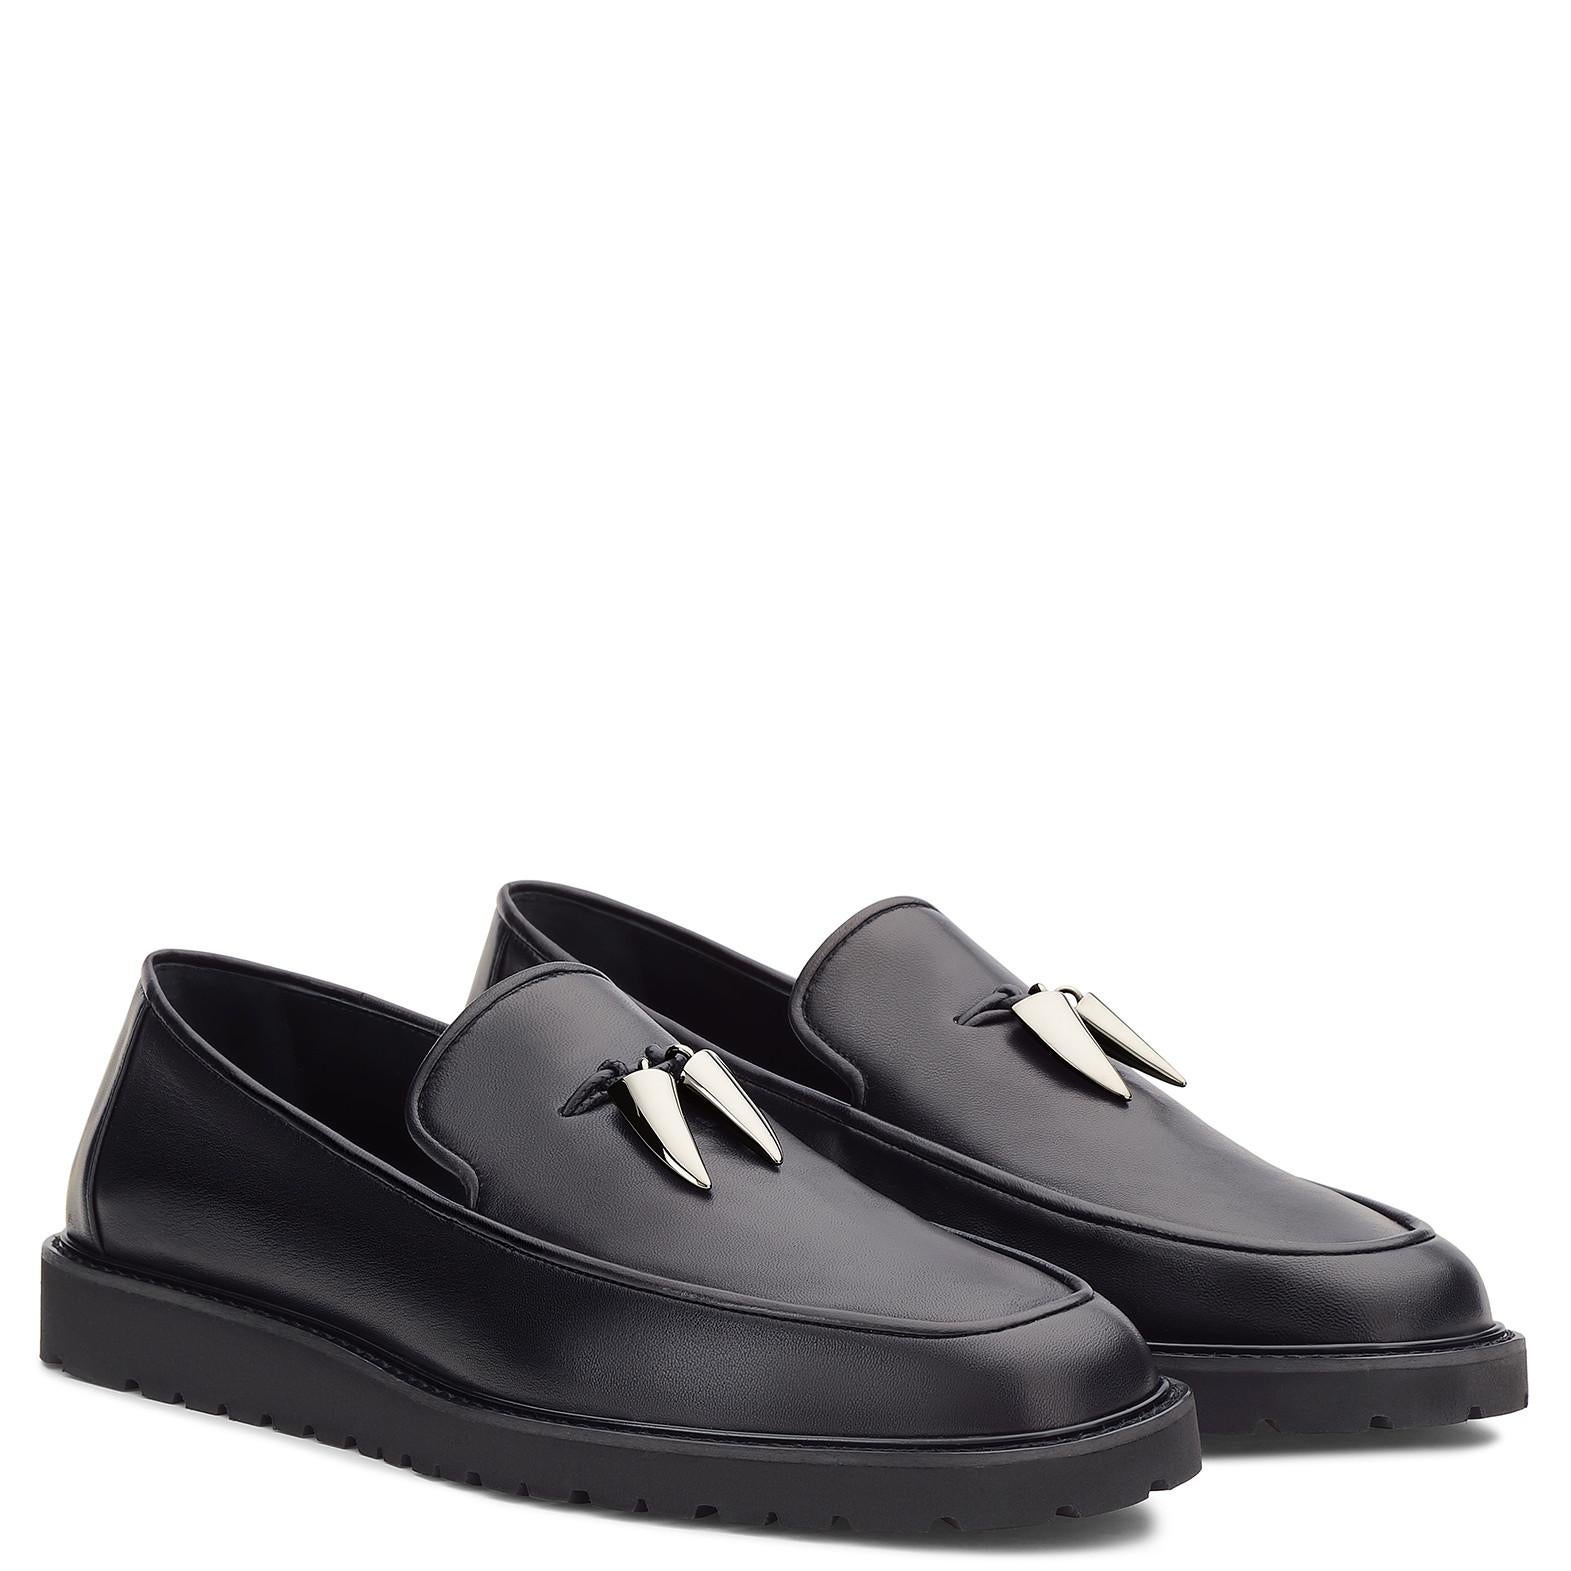 Giuseppe Zanotti New Black Leather Silver Tooth Men's Loafers Shoes in Box

Size IT 45
Leather
Ruthenium metal
Leather and rubber sole
Made in Italy
Includes original Giuseppe Zanotti dust bag and box